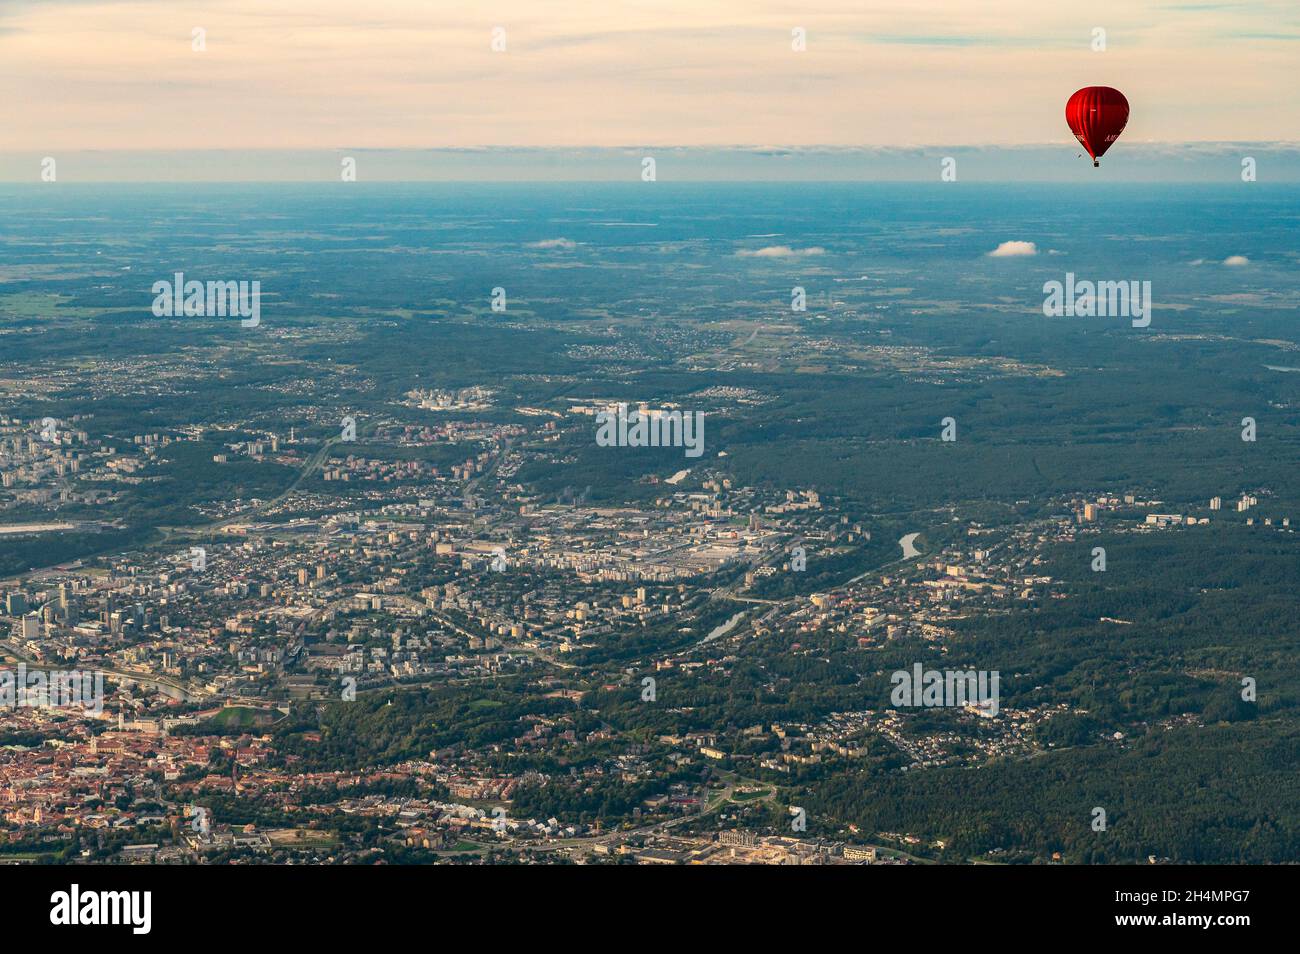 Vilnius, Lithuania - September 14, 2021: Red hot air balloon fly above Vilnius capital of Lithuania. Vilnius cityscape view from the sky Stock Photo